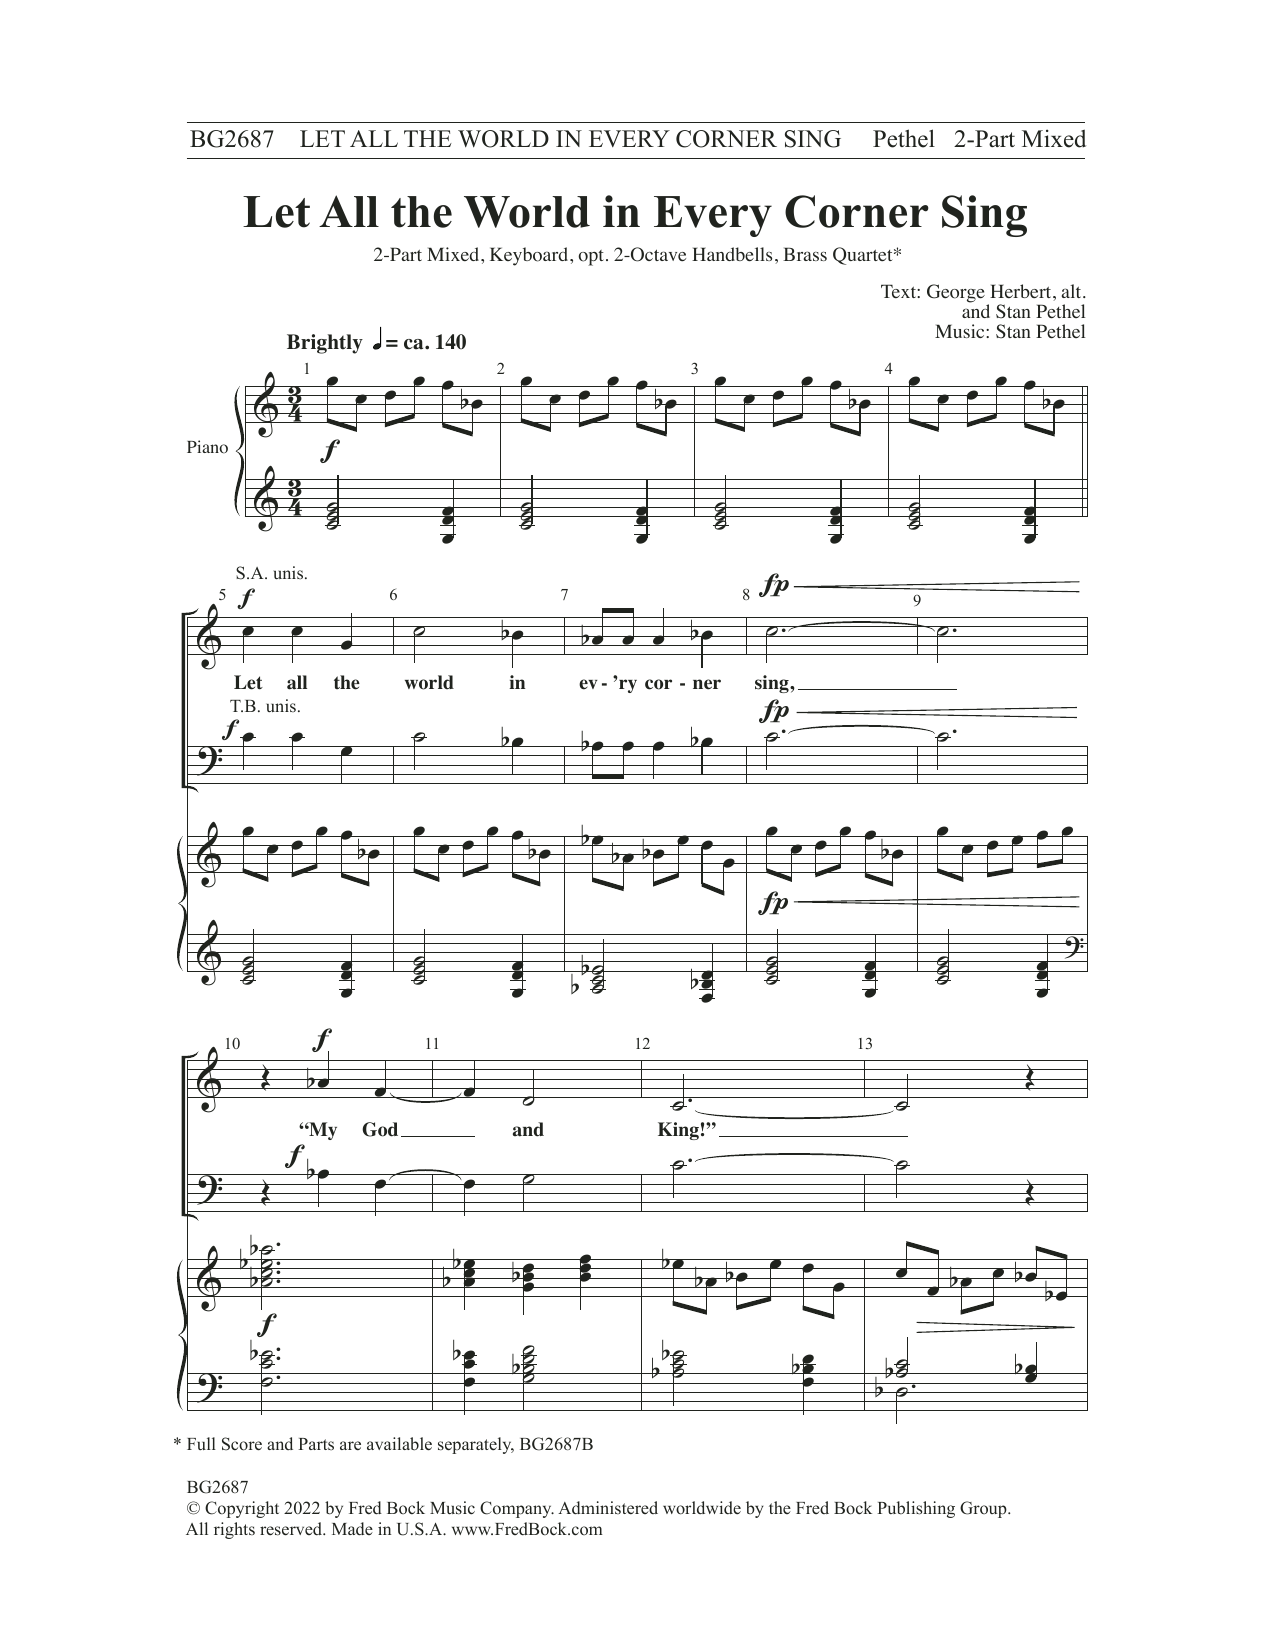 Download Stan Pethel Let All the World in Every Corner Sing Sheet Music